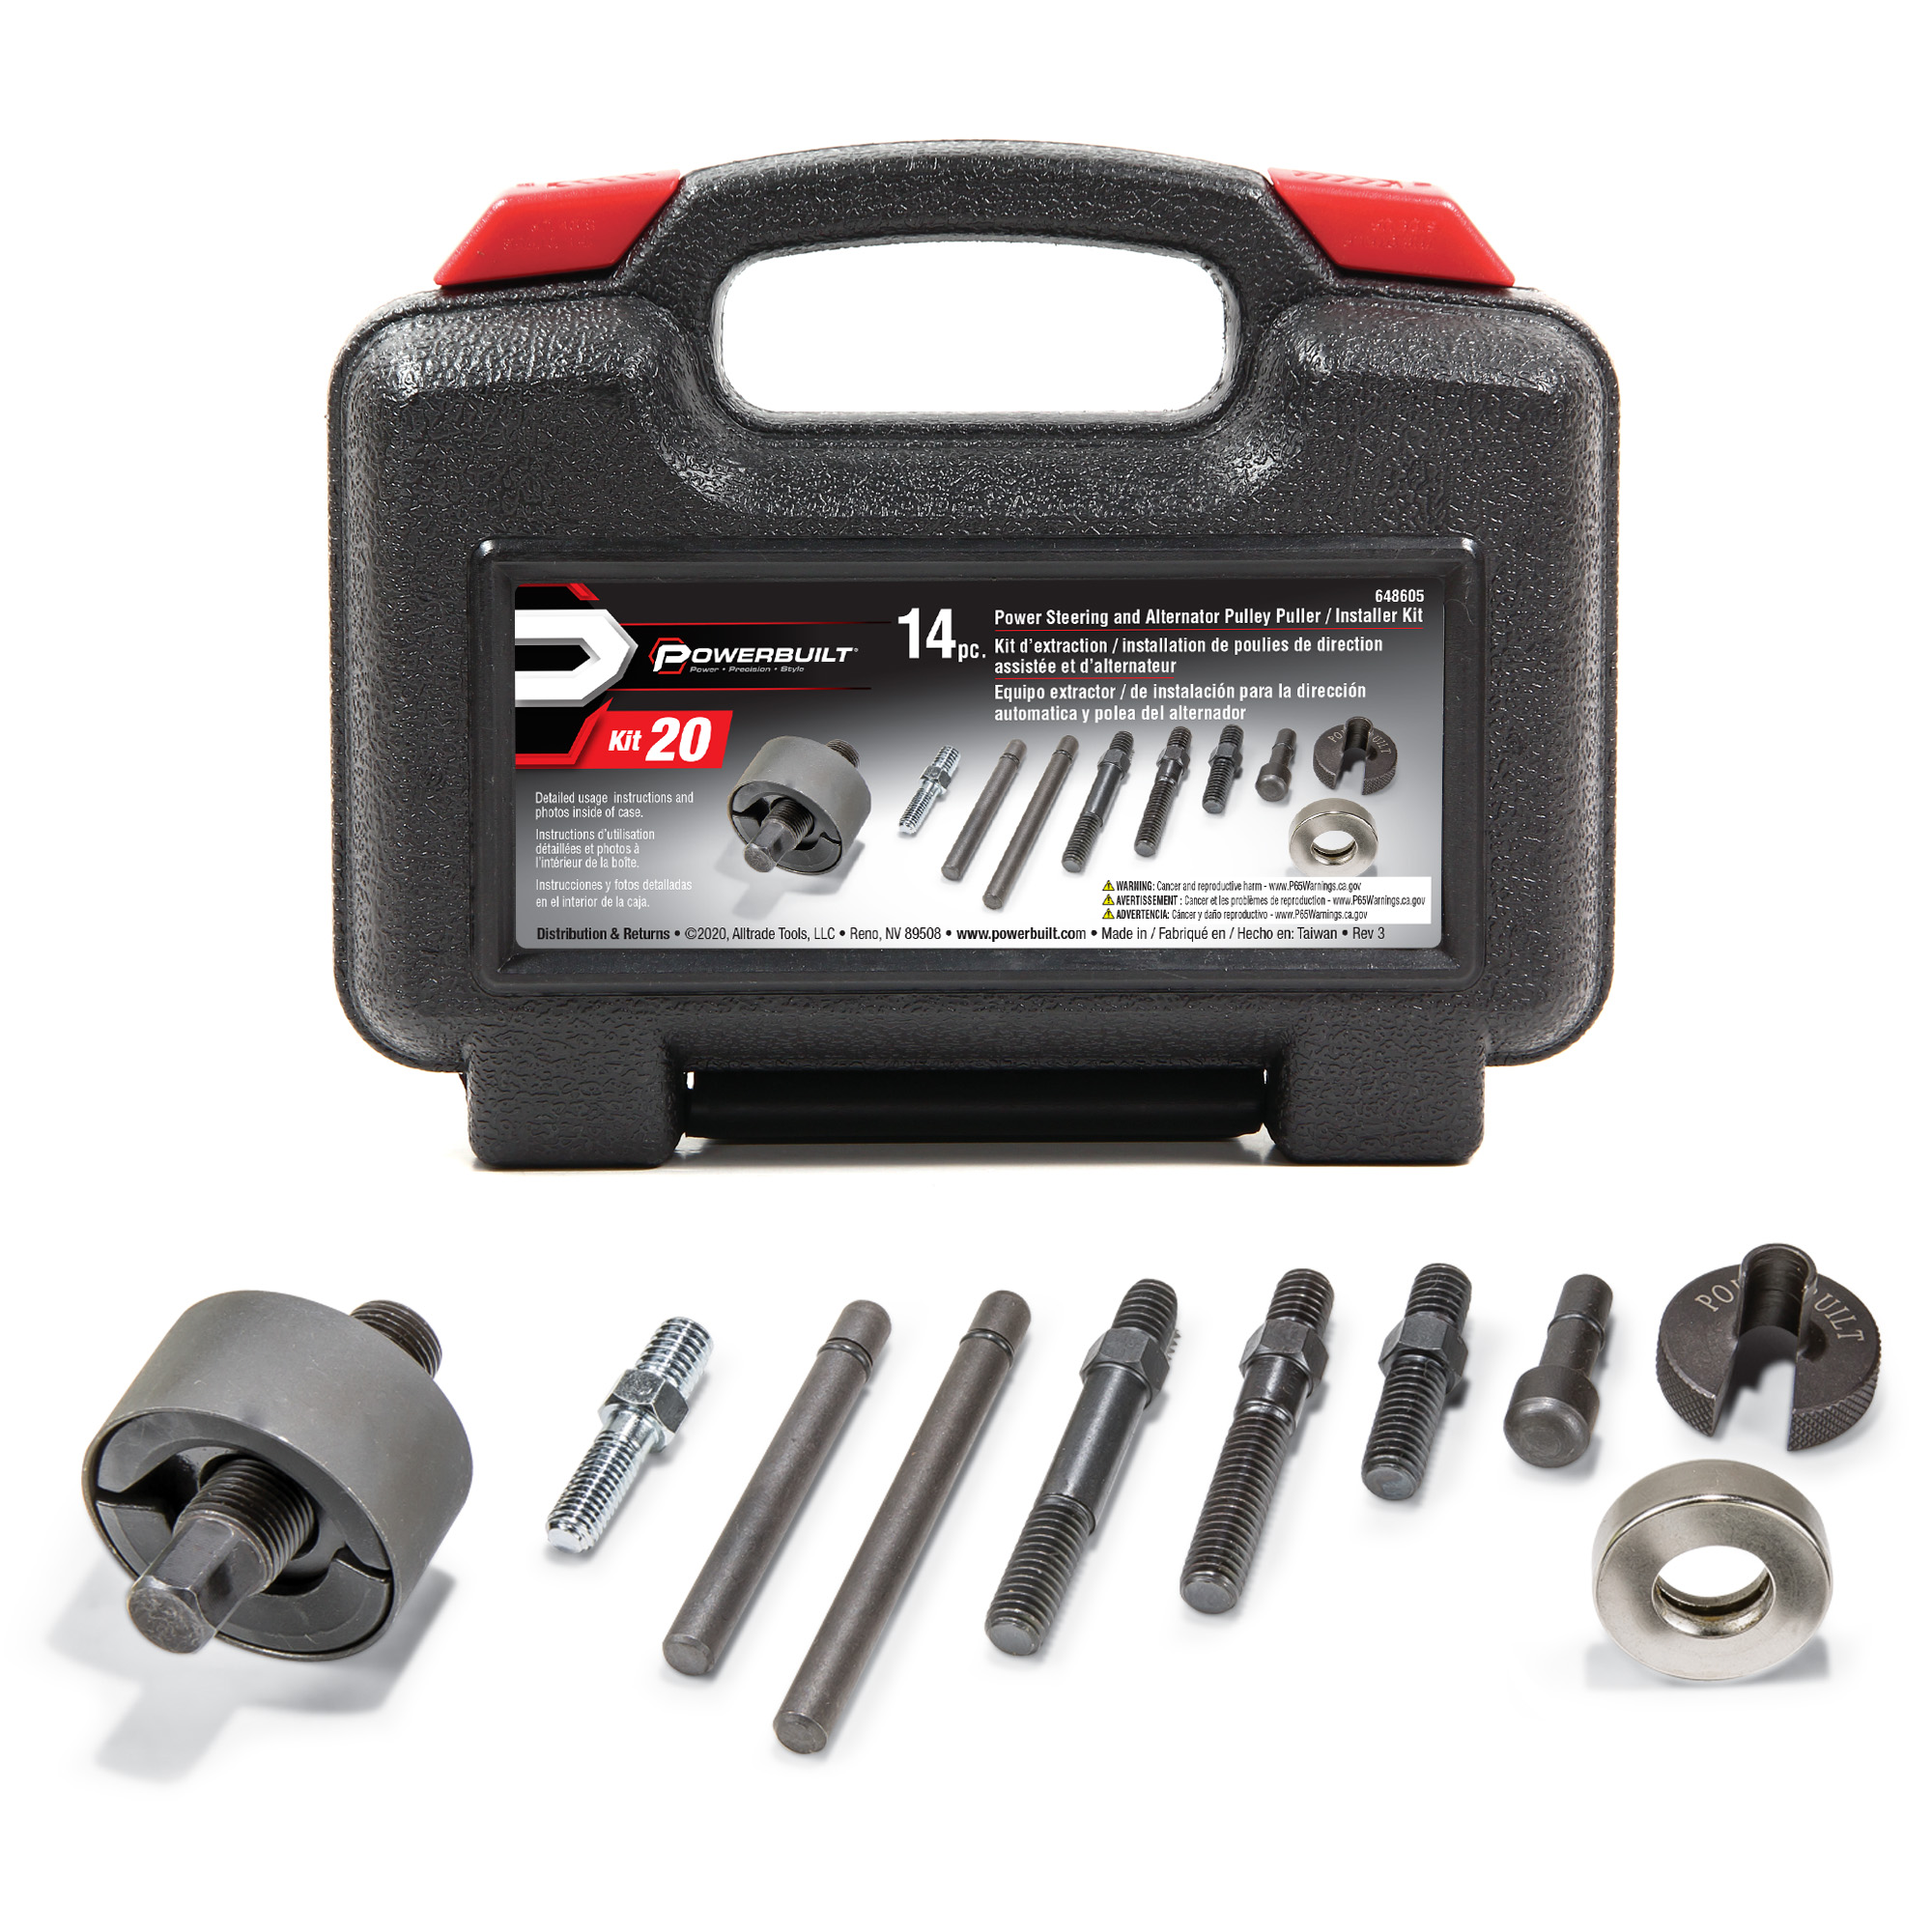 Car Wheel Bearing Removal Tools A Comprehensive Guide